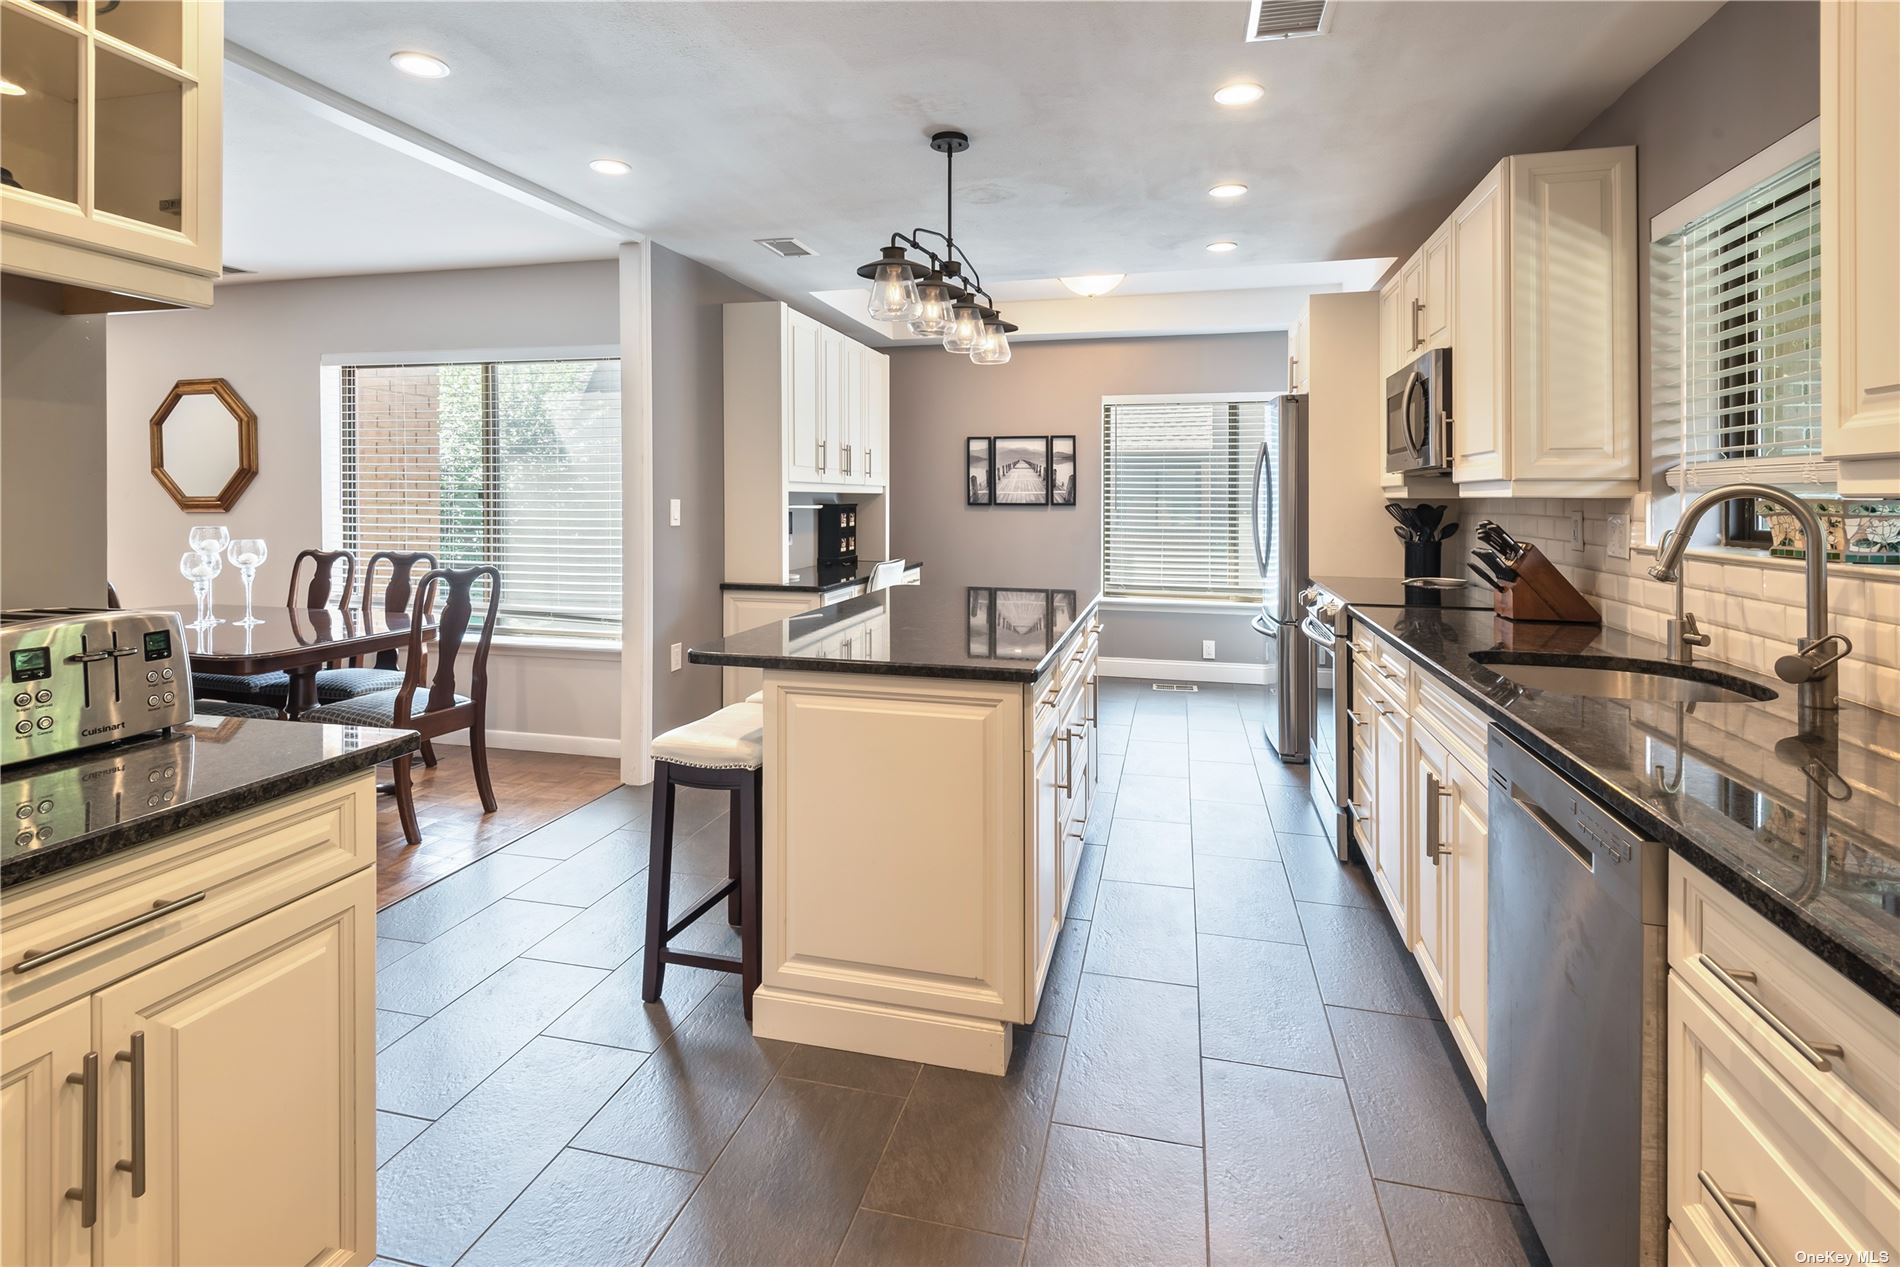 a kitchen with granite countertop lots of counter top space and stainless steel appliances